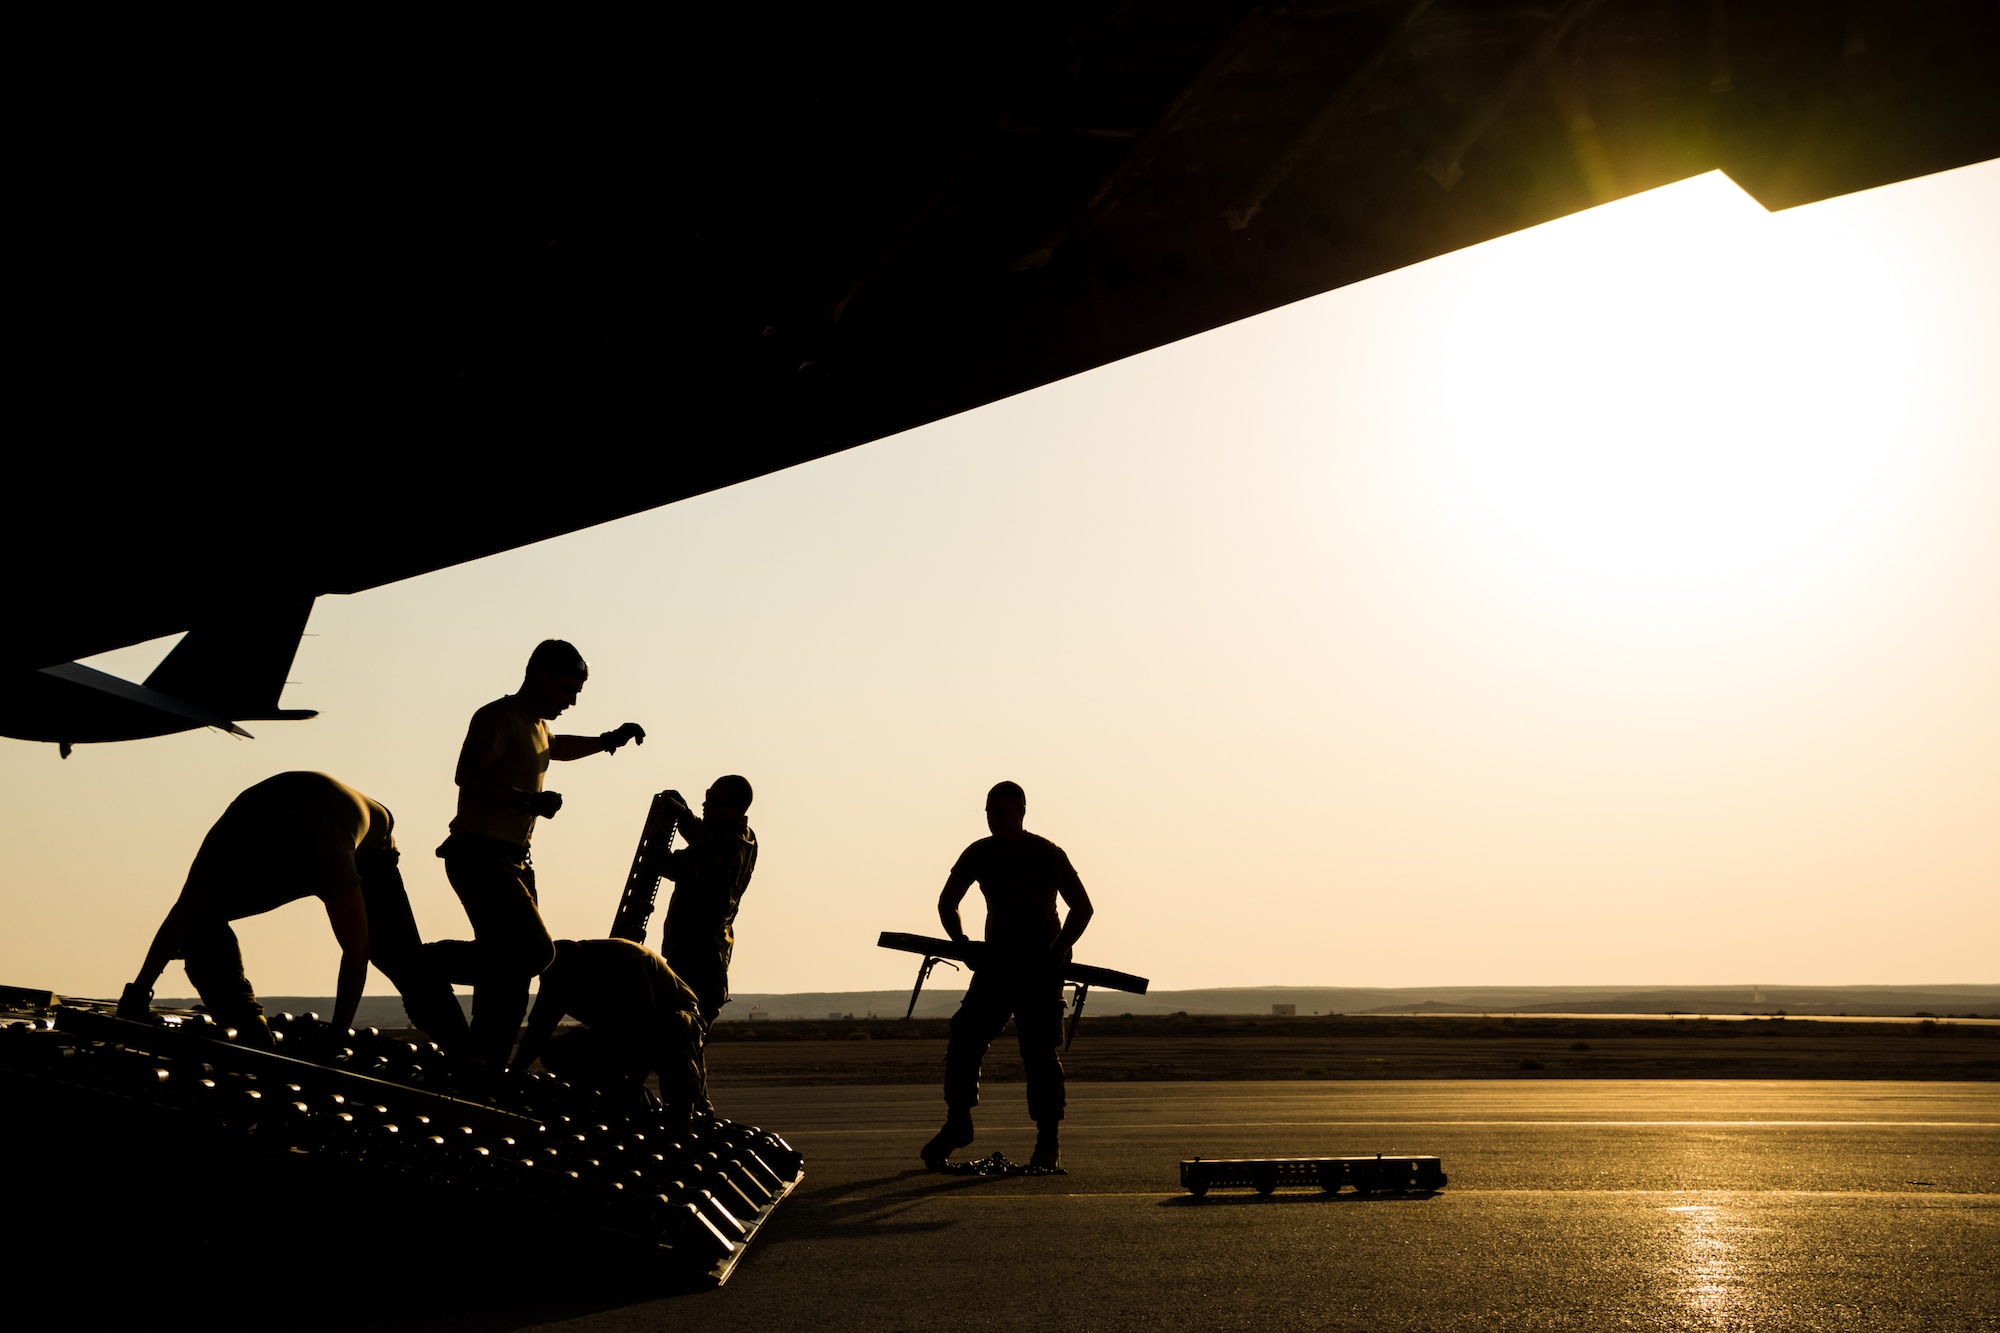 Personnel from the 816th Expeditionary Airlift Squadron and 332nd Air Expeditionary Wing prepare to load cargo on a C-17 Globemaster III at an undisclosed location in Southwest Asia after transporting cargo between U.S. Africa Command and U.S. Central Command, Aug. 28, 2018. Al Udeid-based aircraft have completed nearly 15 missions this calendar year between the two commands. (U.S. Air Force photo by Tech. Sgt. Ted Nichols/Released)